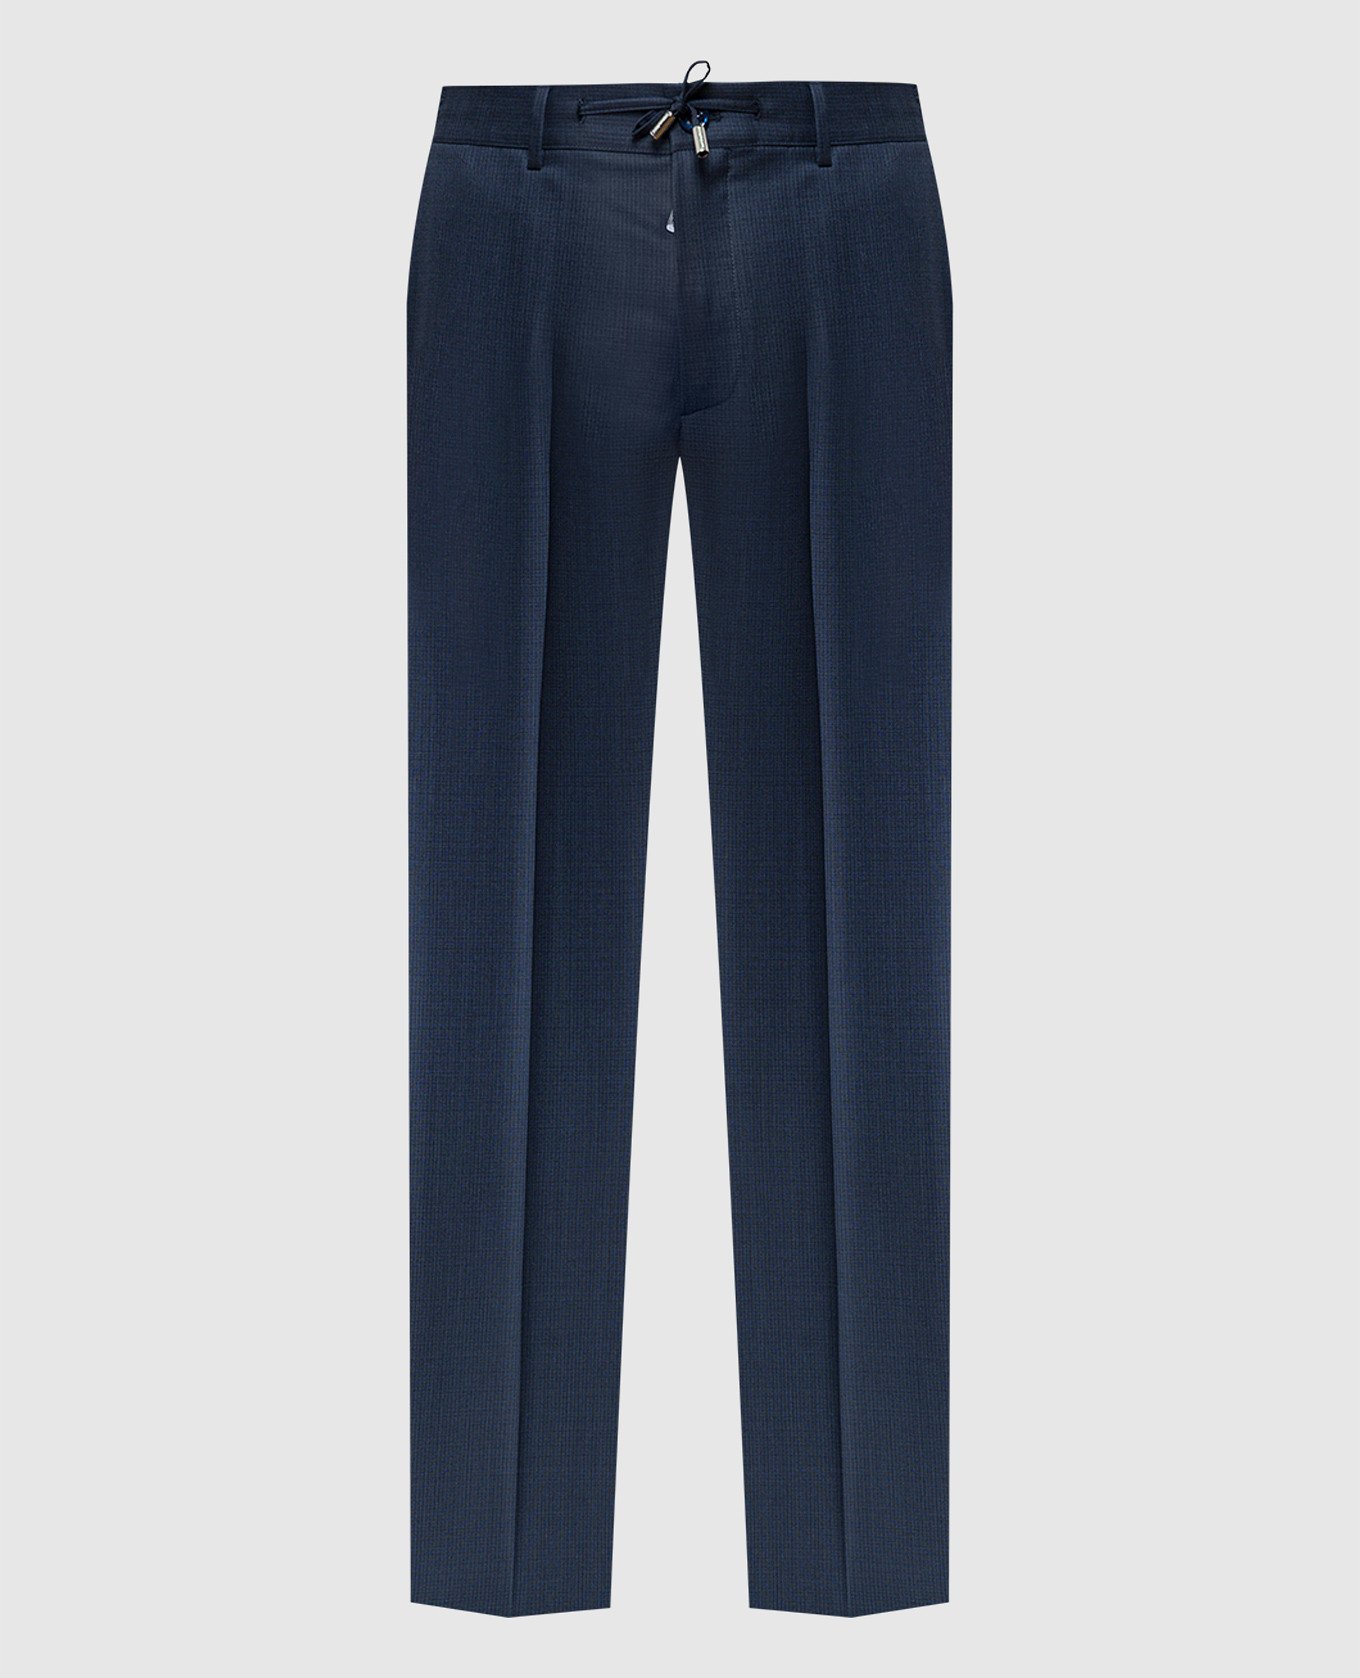 Blue trousers in wool and silk with a metallic logo